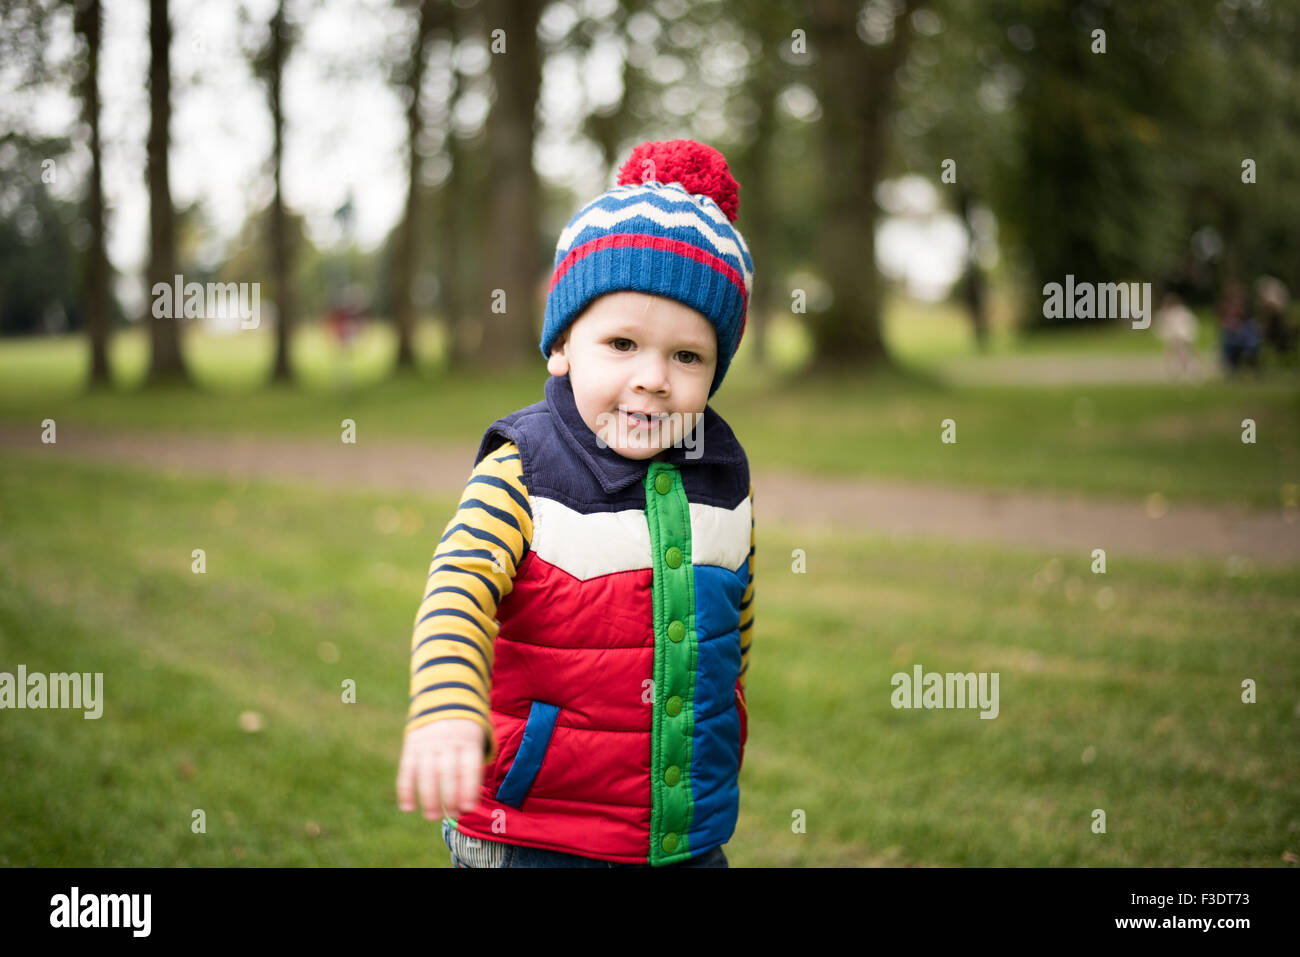 Boy with Cheeky face in park Stock Photo